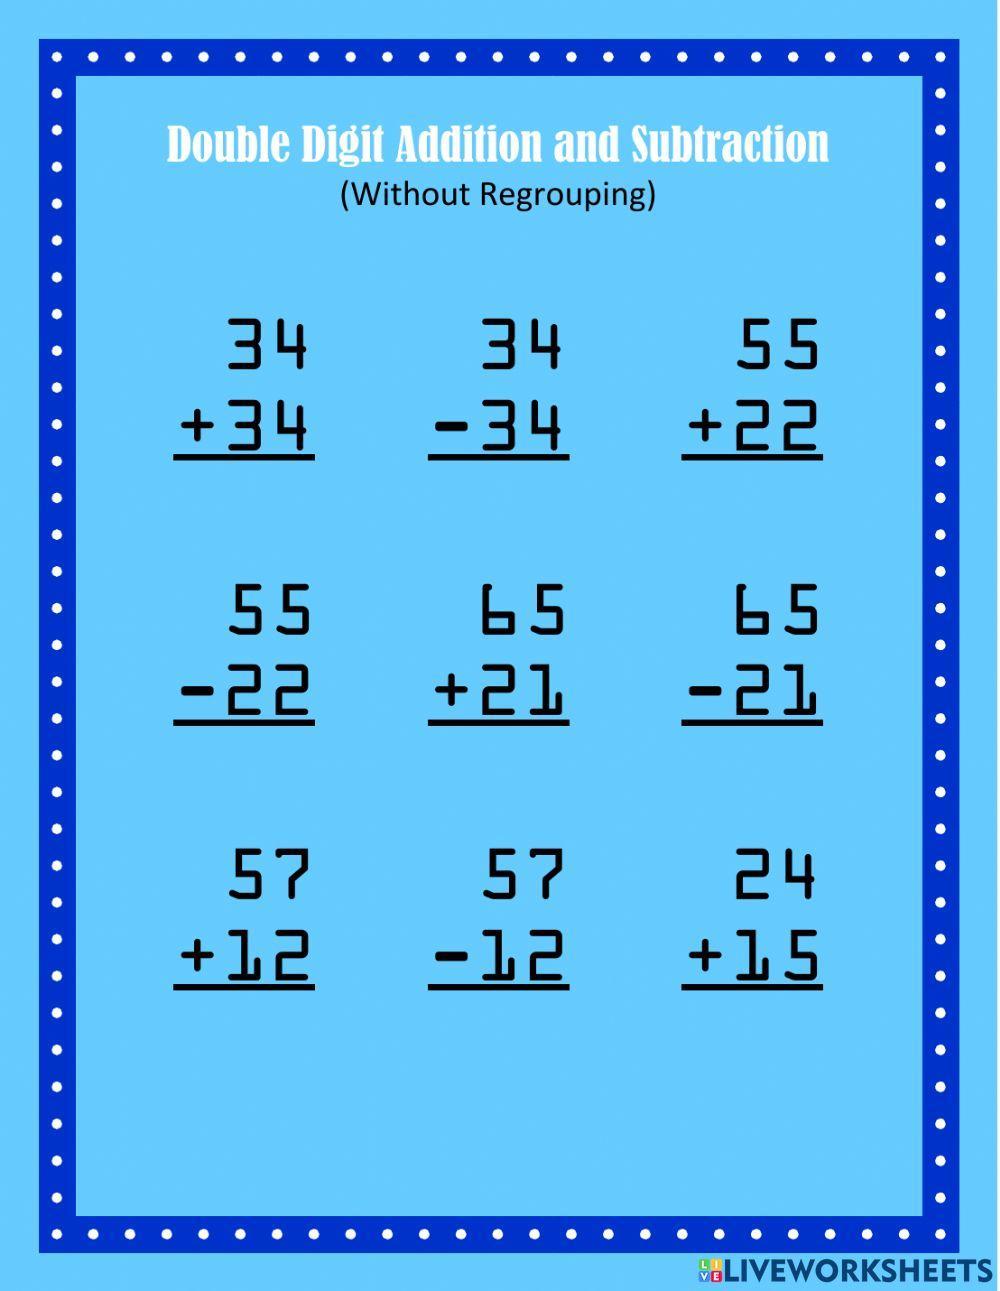 Double Digit Addition and Subtraction Set 4